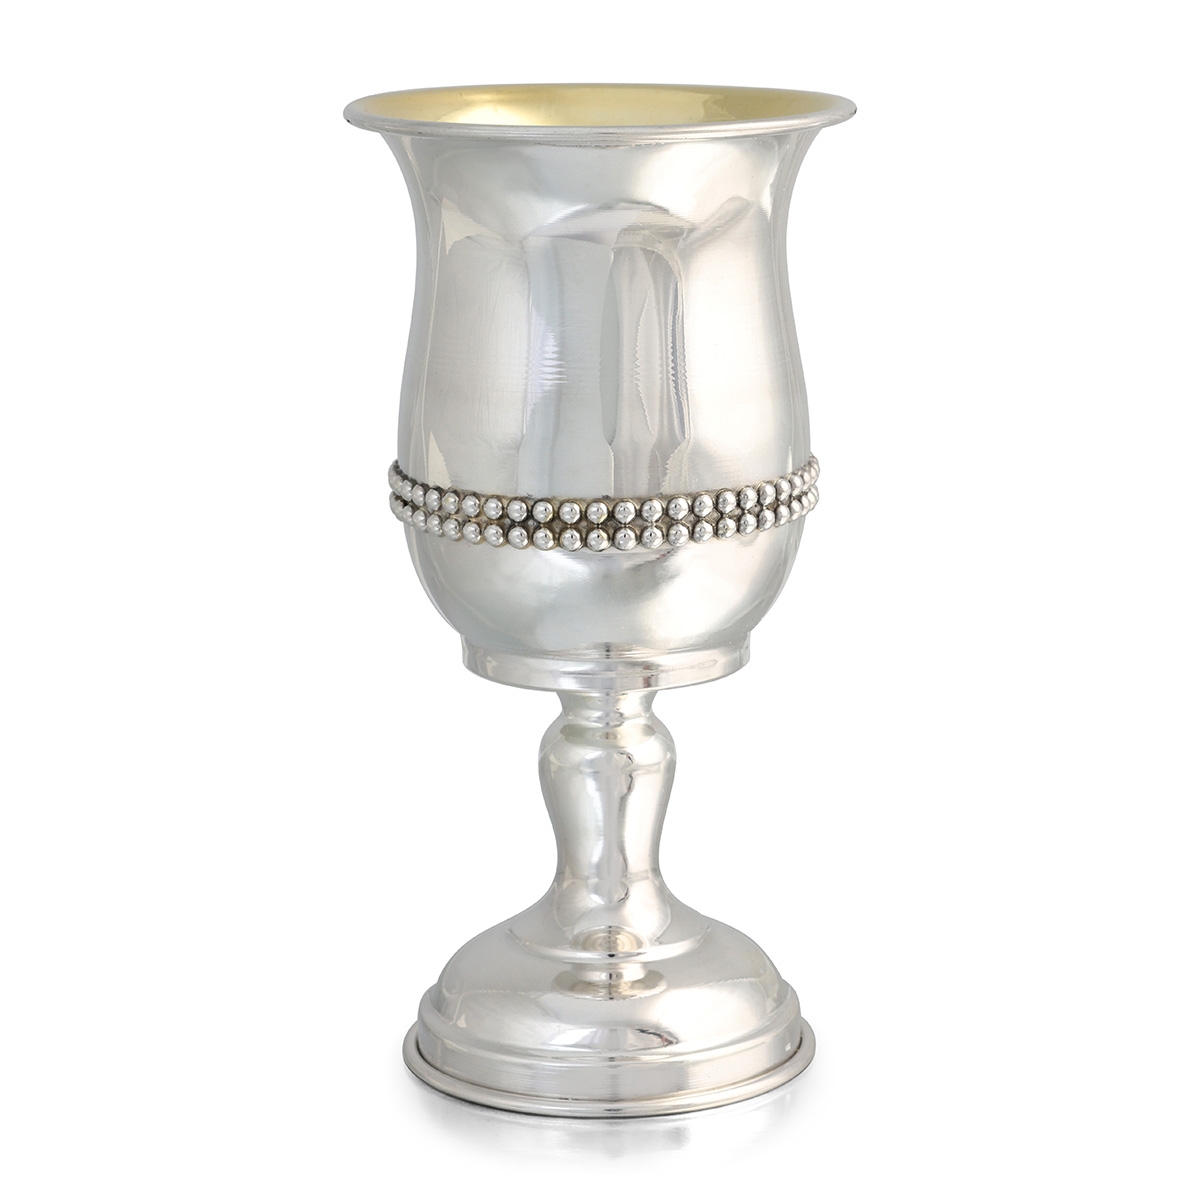 Stemmed Sterling Silver Kiddush Cup with Beaded Filigree Design - 1